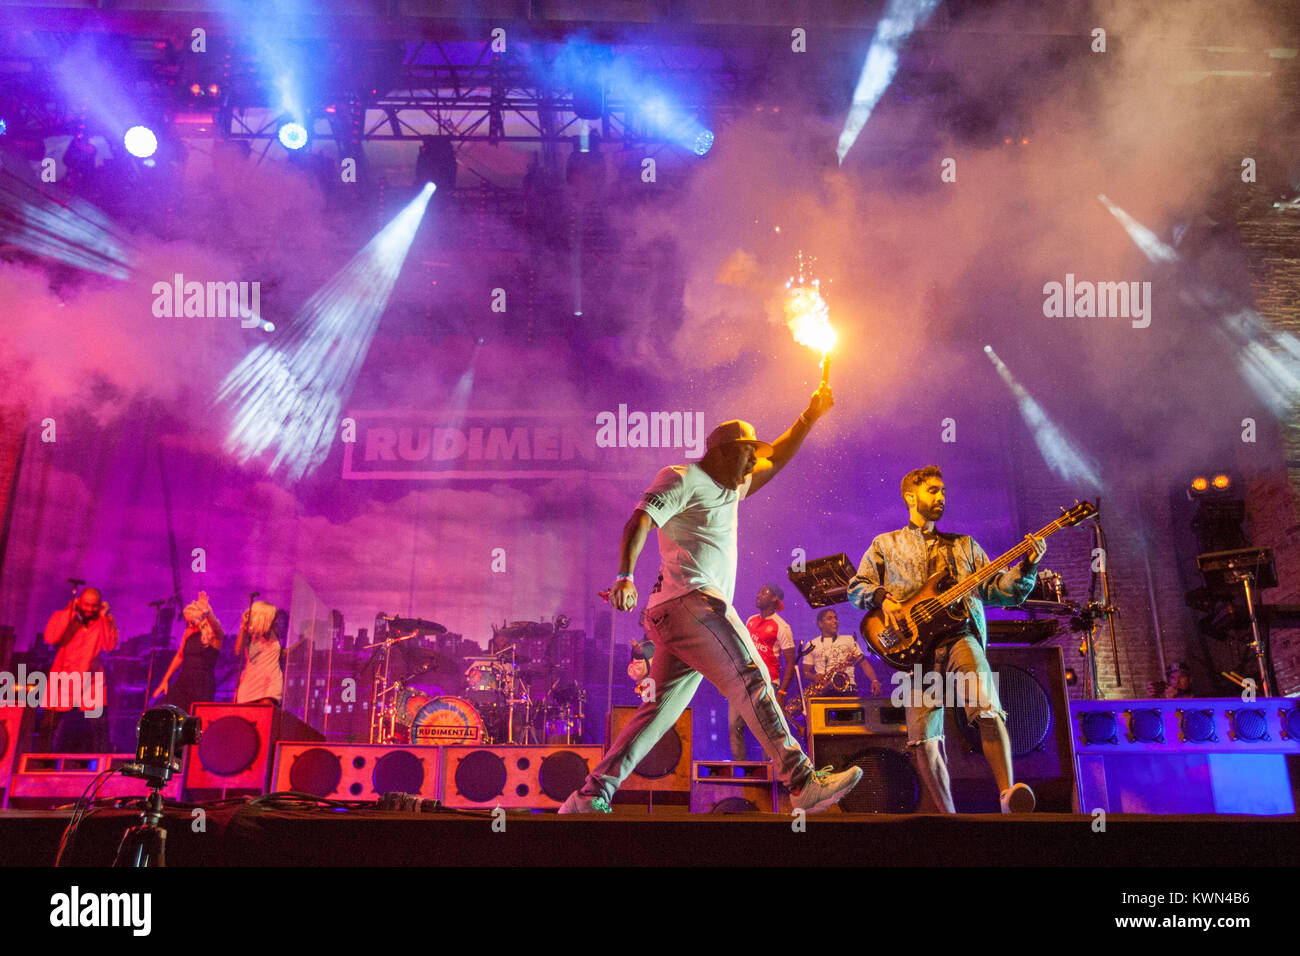 The English drum and bass band Rudimental performs a live concert at the British music festival Lovebox 2015 in London. Here DJ Locksmith (L) is pictured live on stage with musician Amir Amor (R). United Kingdom, 17/07 2015. Stock Photo